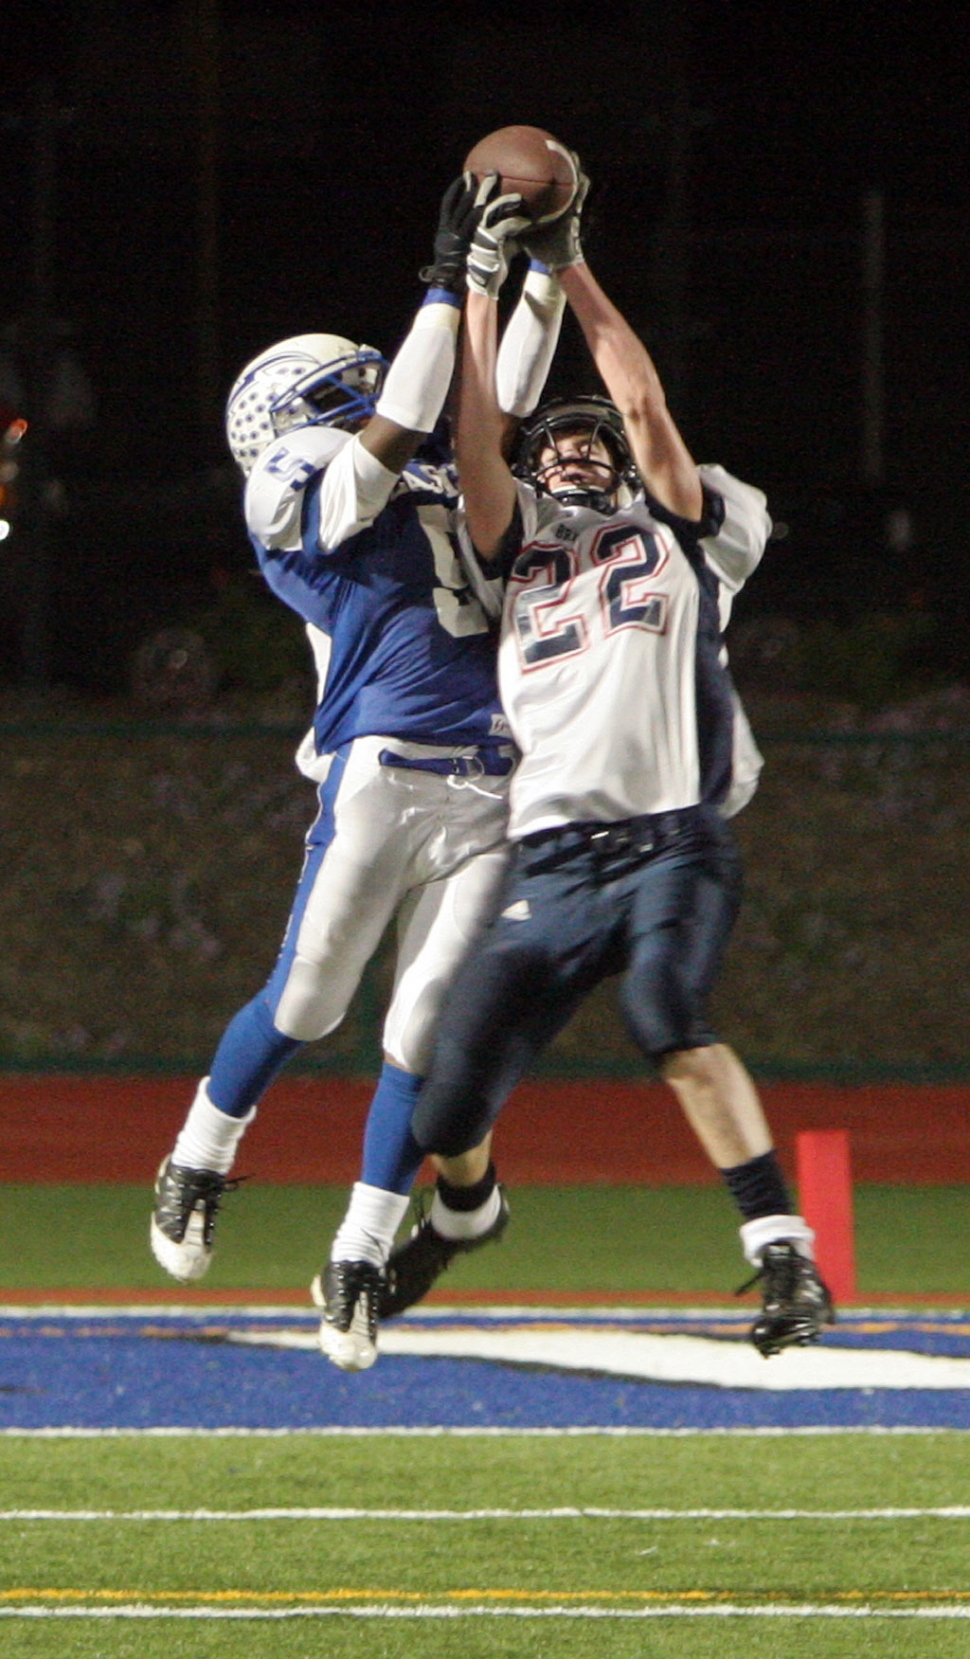 Troy Hayes jumps up and intercepts the ball against Brentwood last Firiday. This interception was a key play in the 4th quarter.